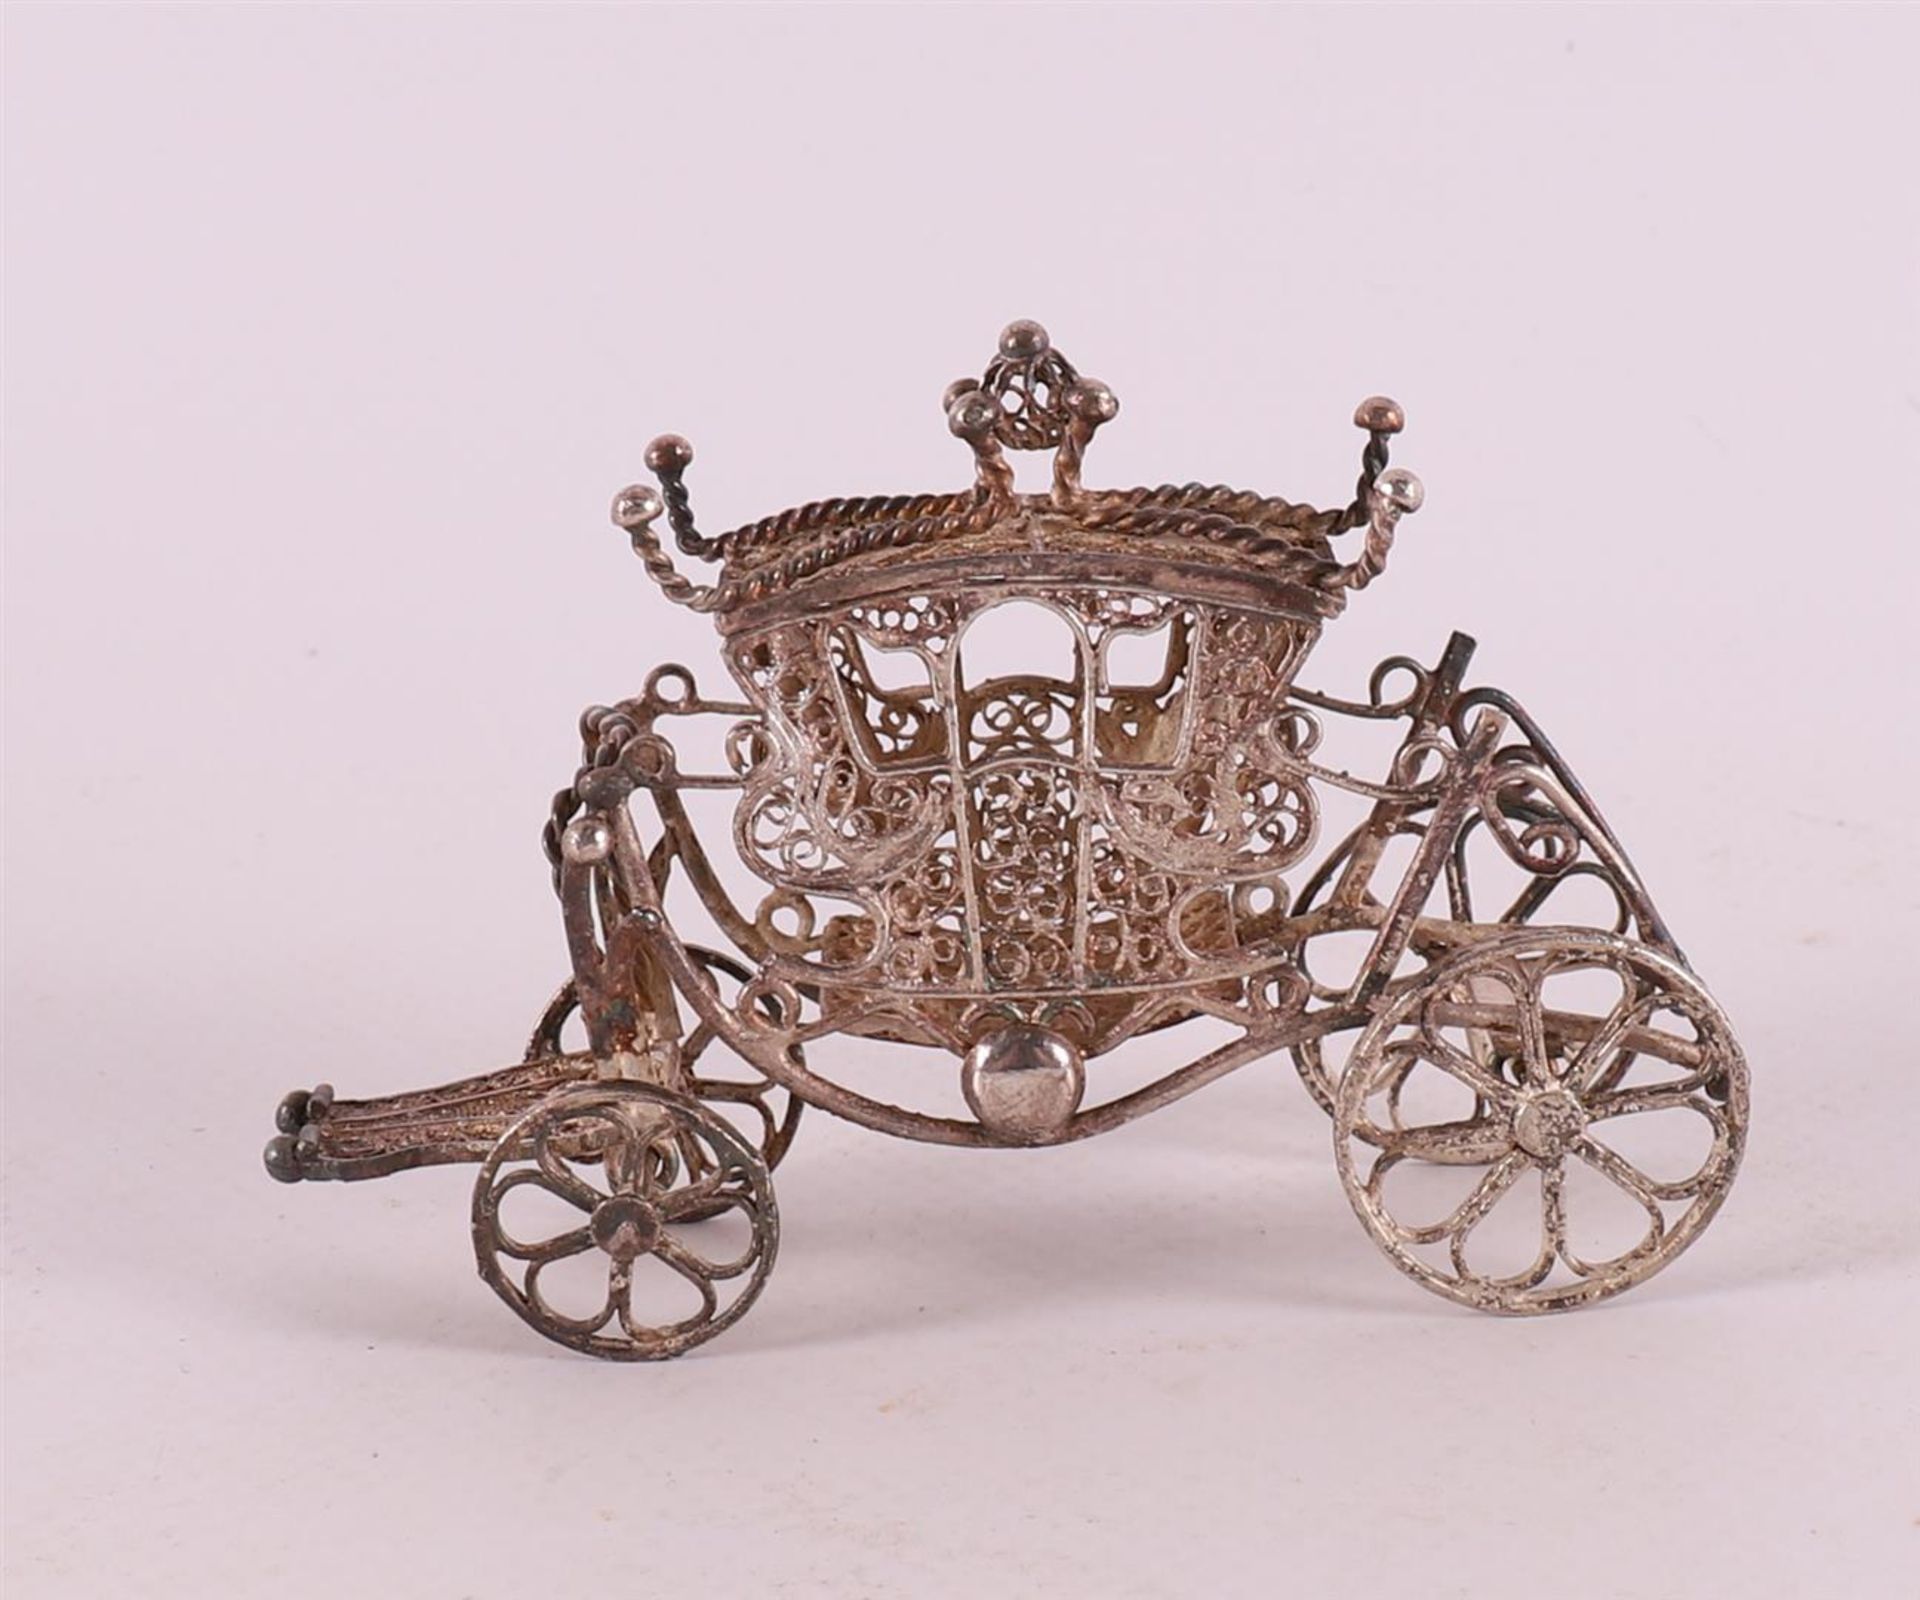 Etagere silver. A 2nd grade 835/1000 silver filigree carriage, 20th century